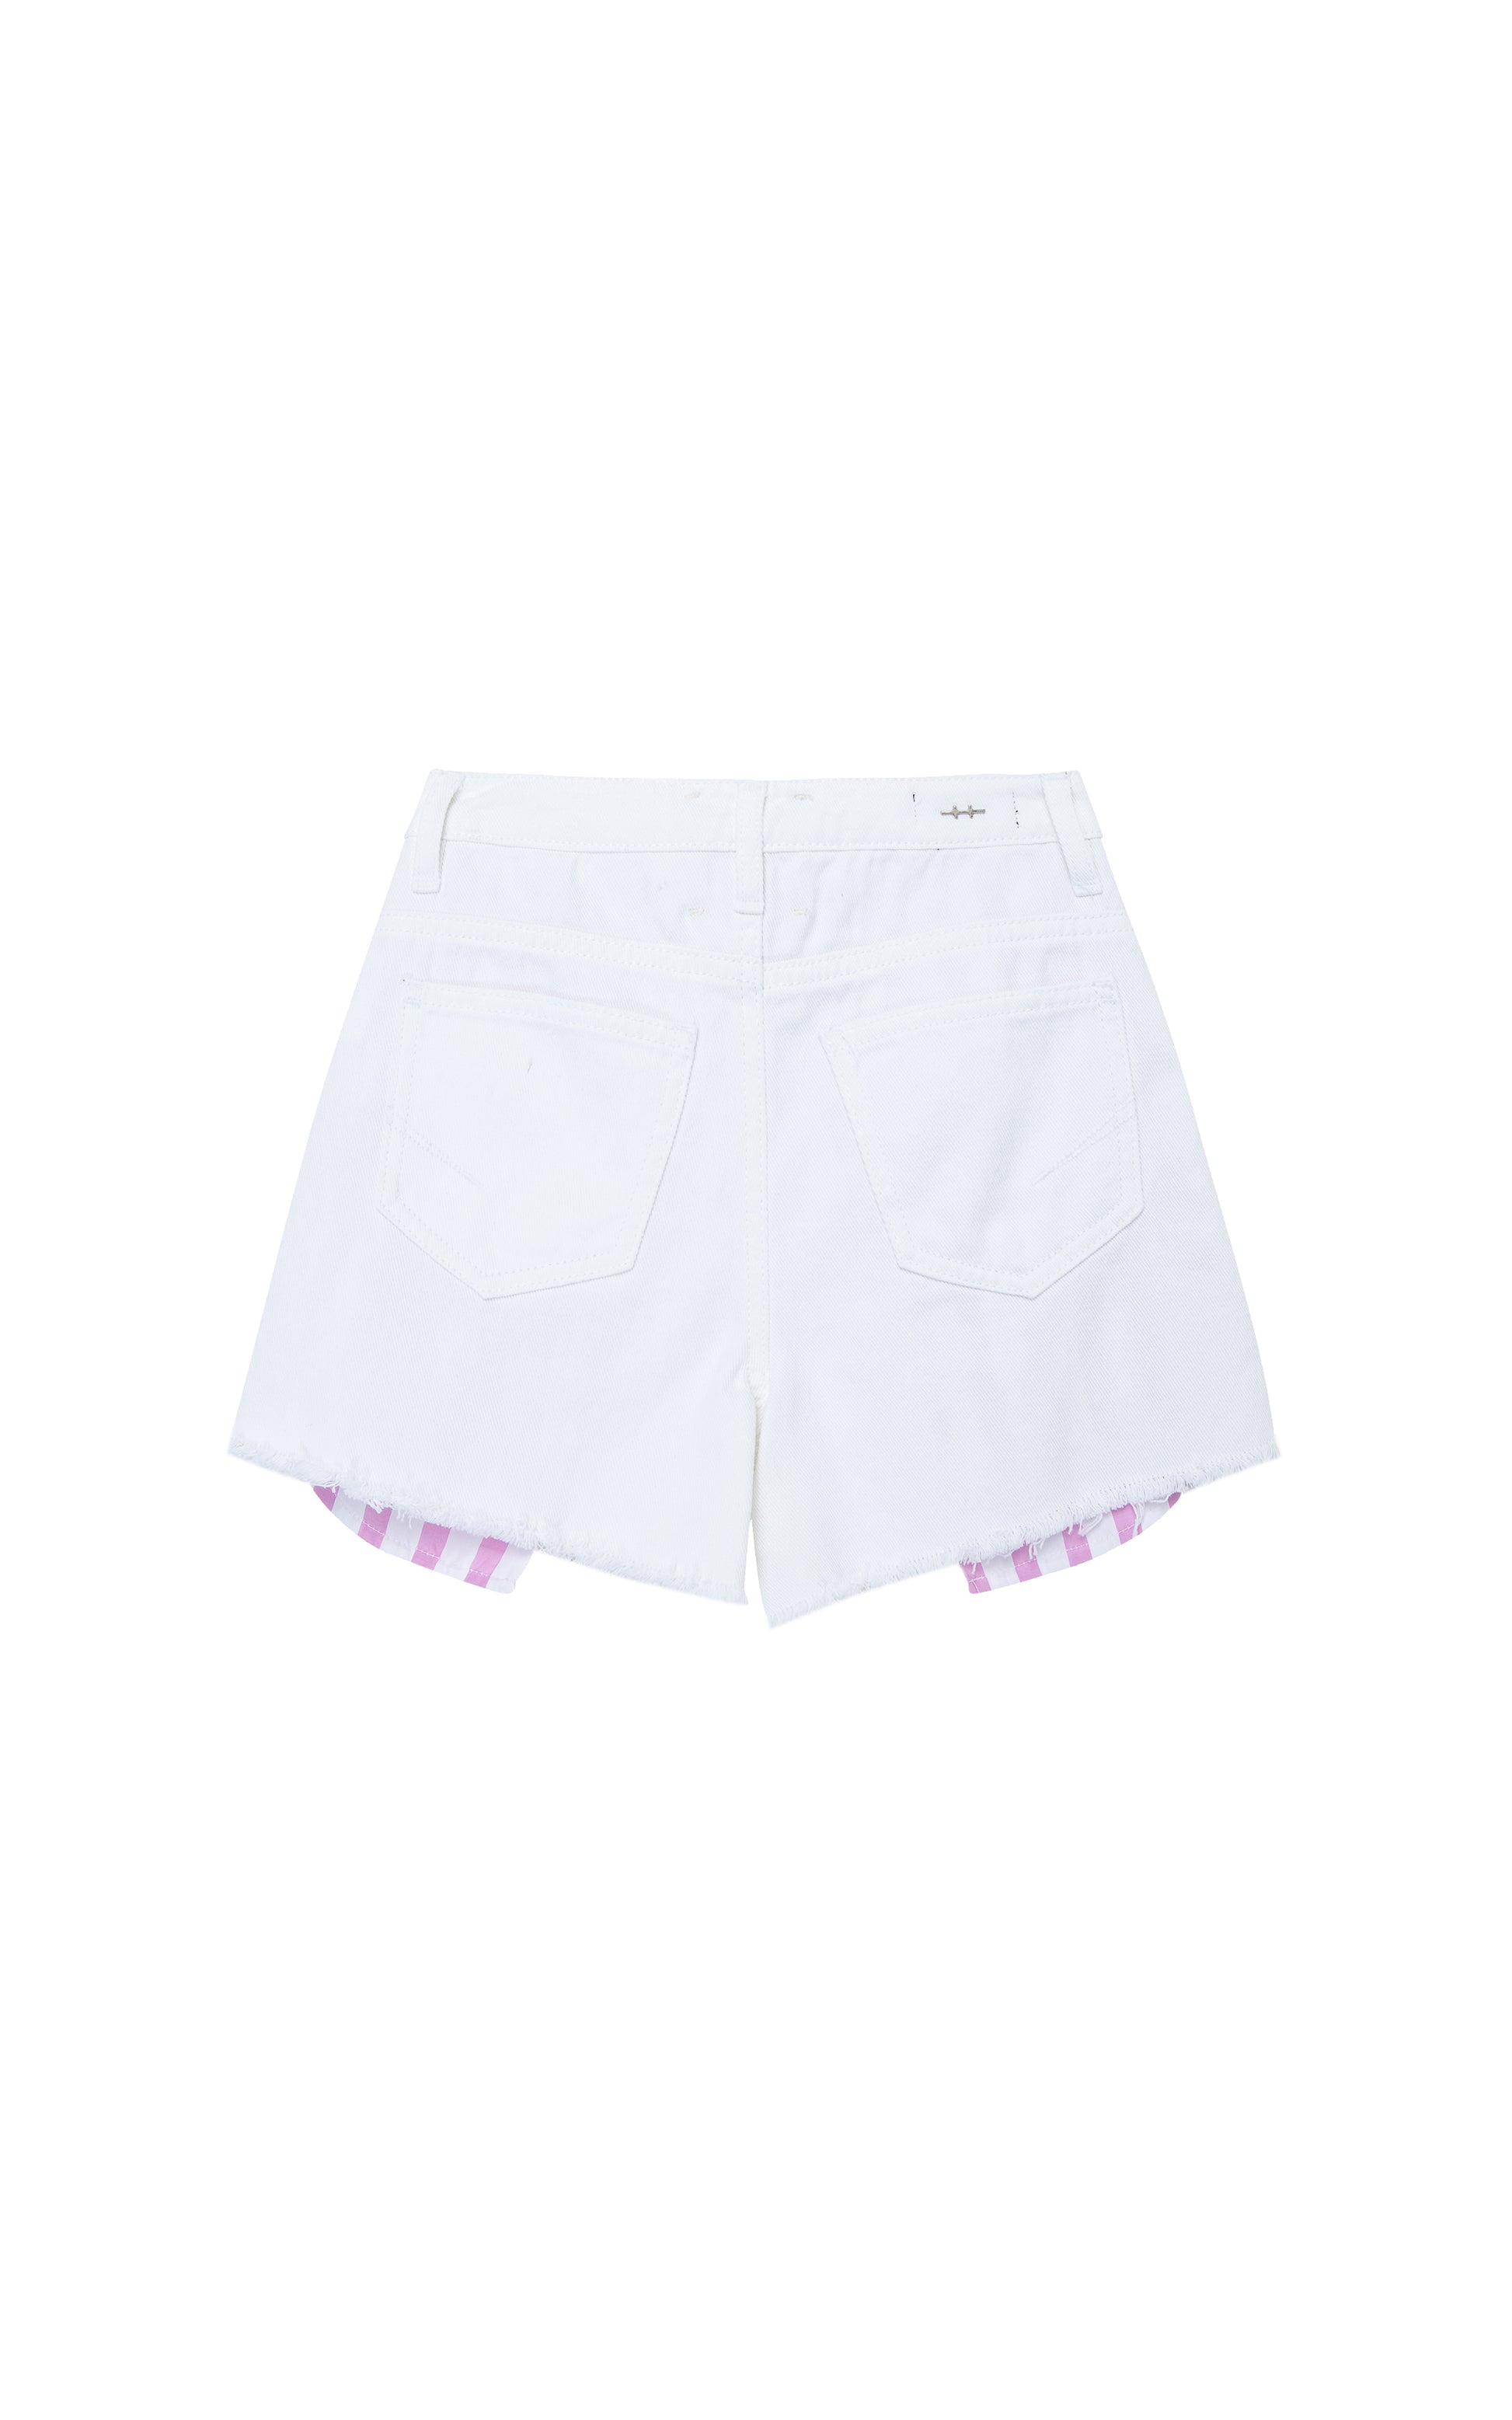 Back of white denim shorts with pink-and-white striped exposed pockets